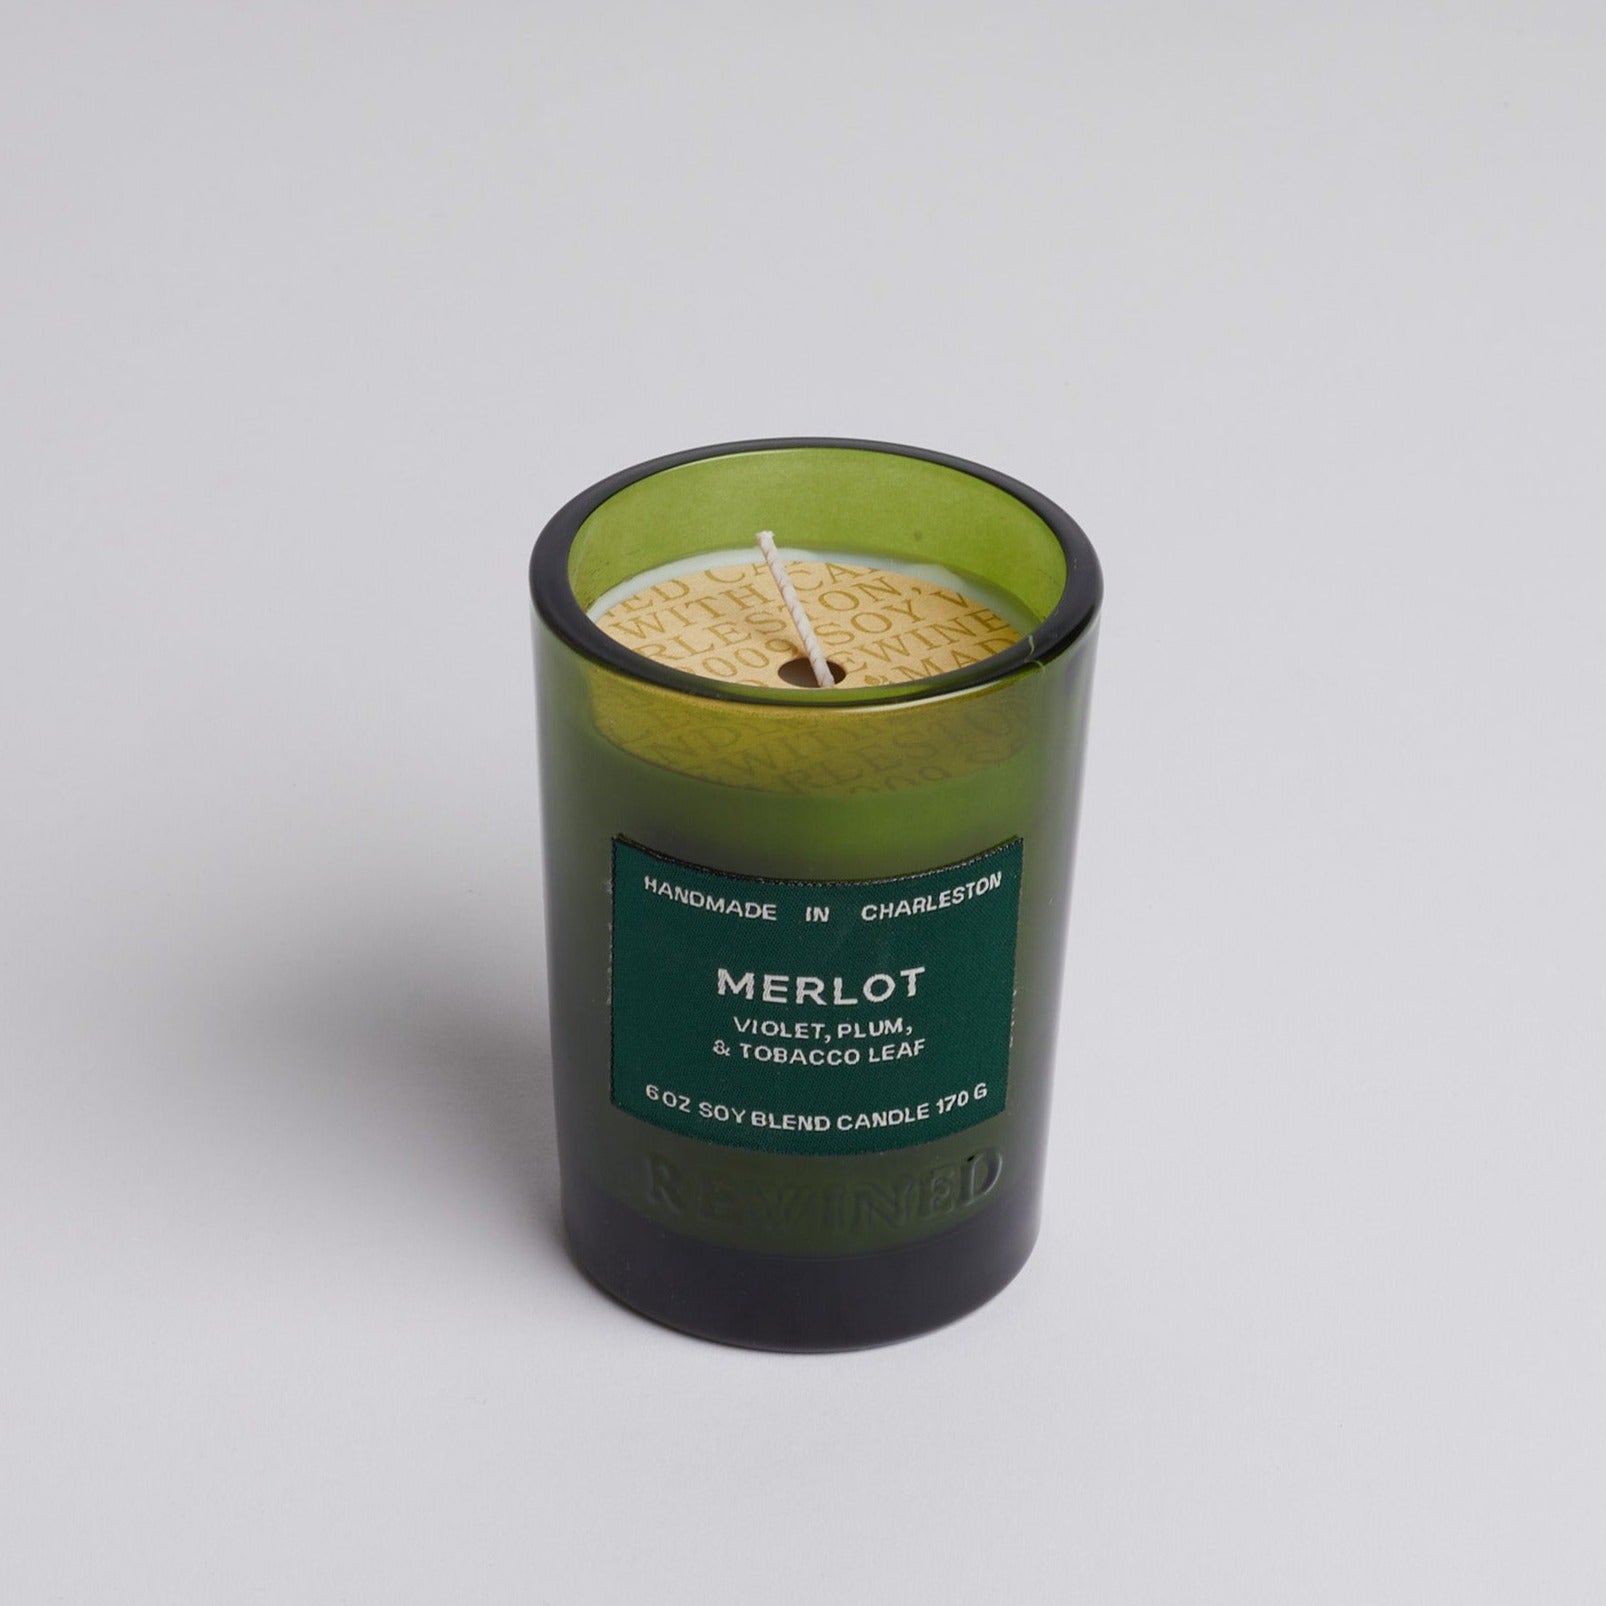 Green glass merlot candle on white background.